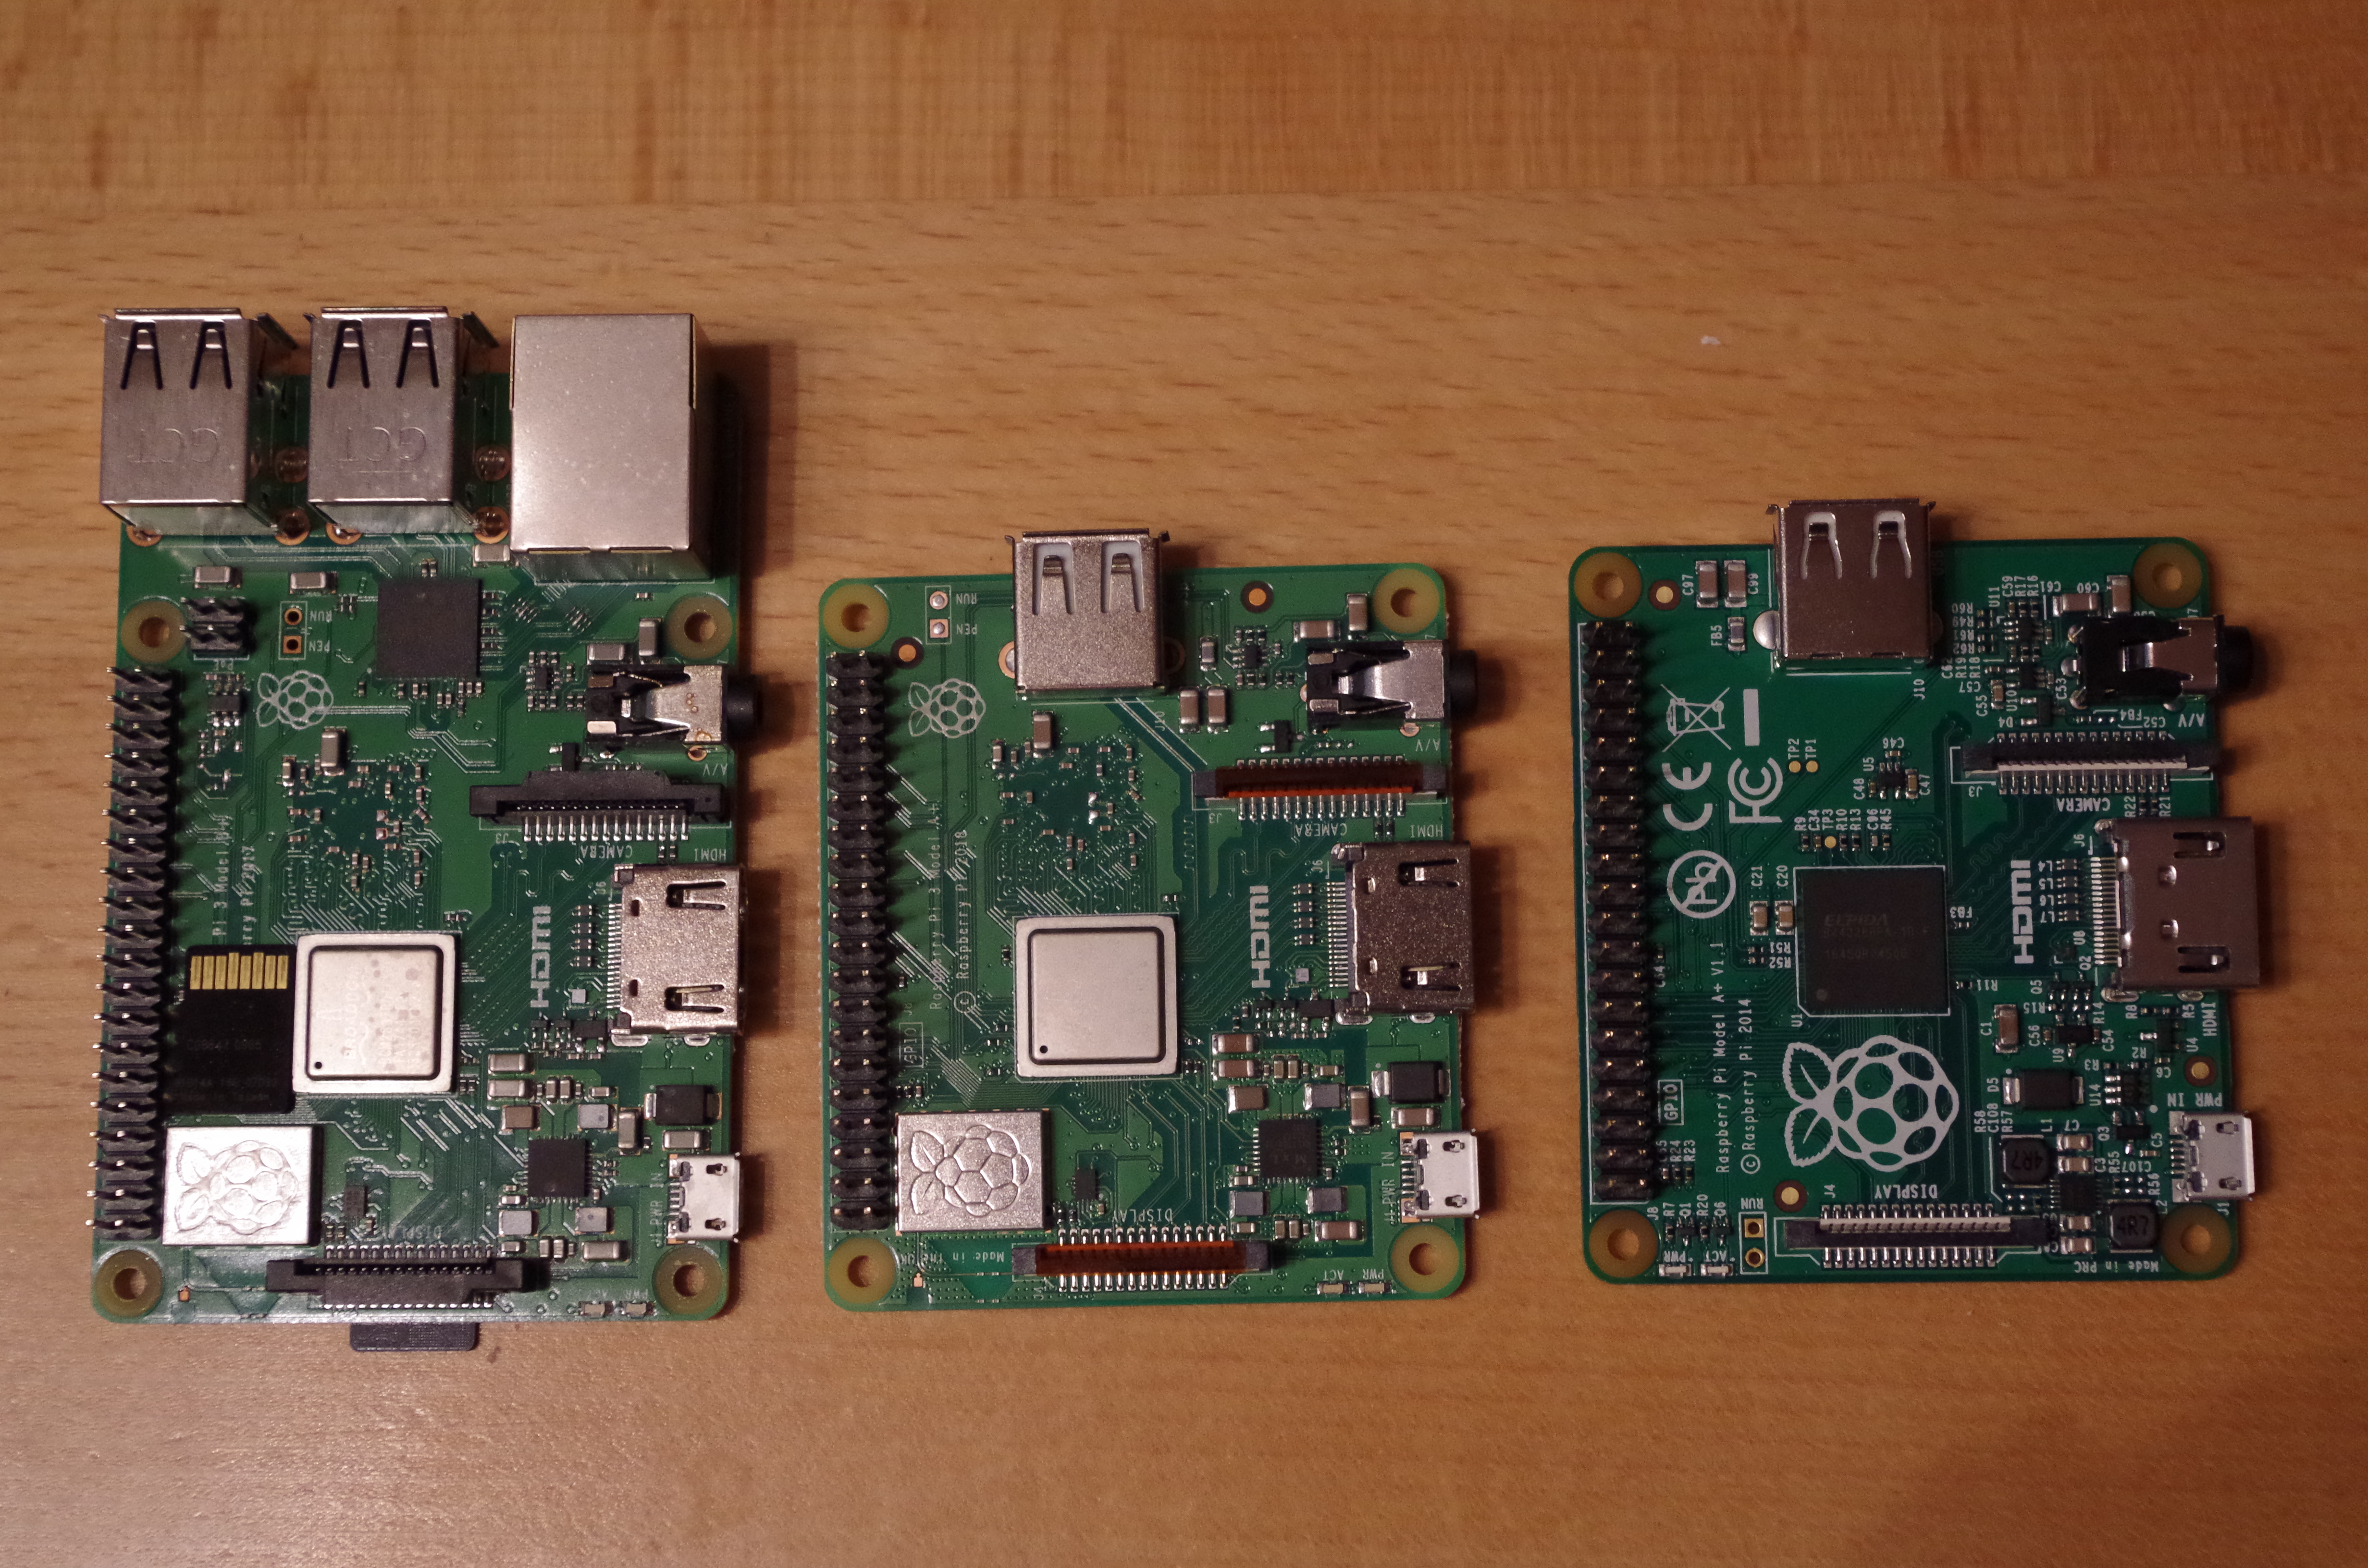 Hands-on with the new Raspberry Pi 3 Model A+ and new Raspbian